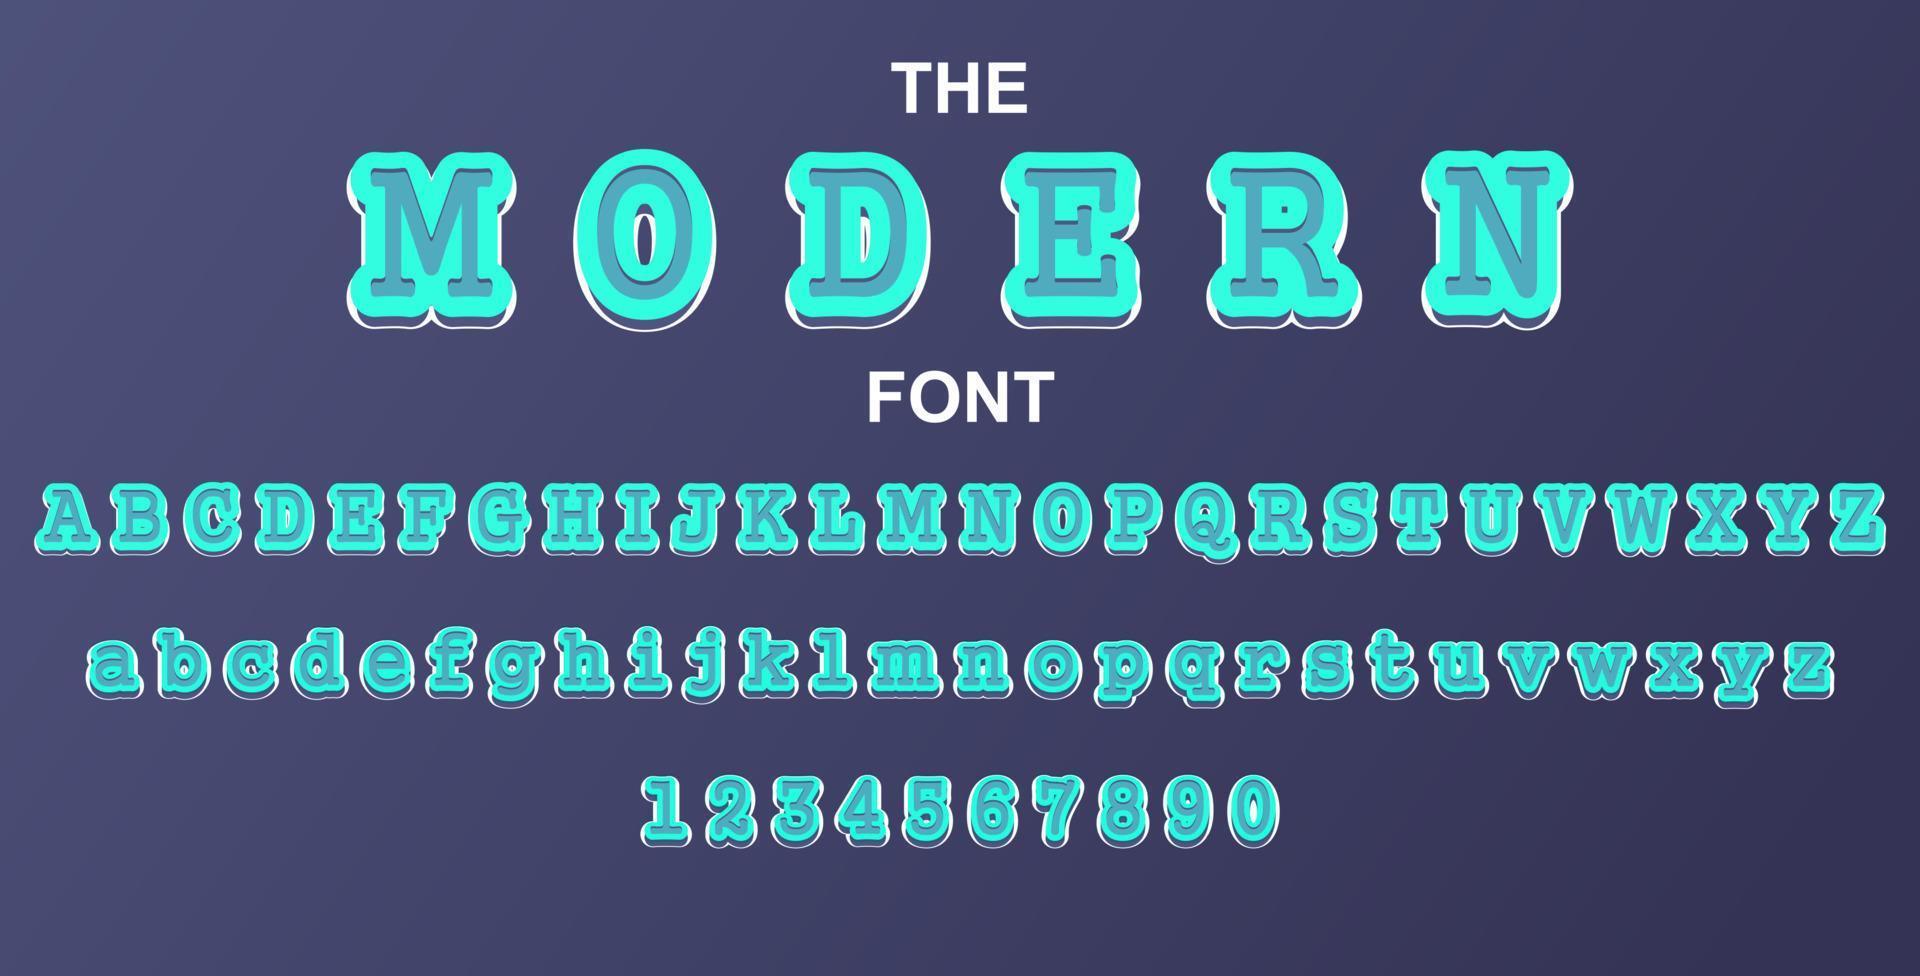 Modern font and alphabet with numbers. Vector typography letter design.